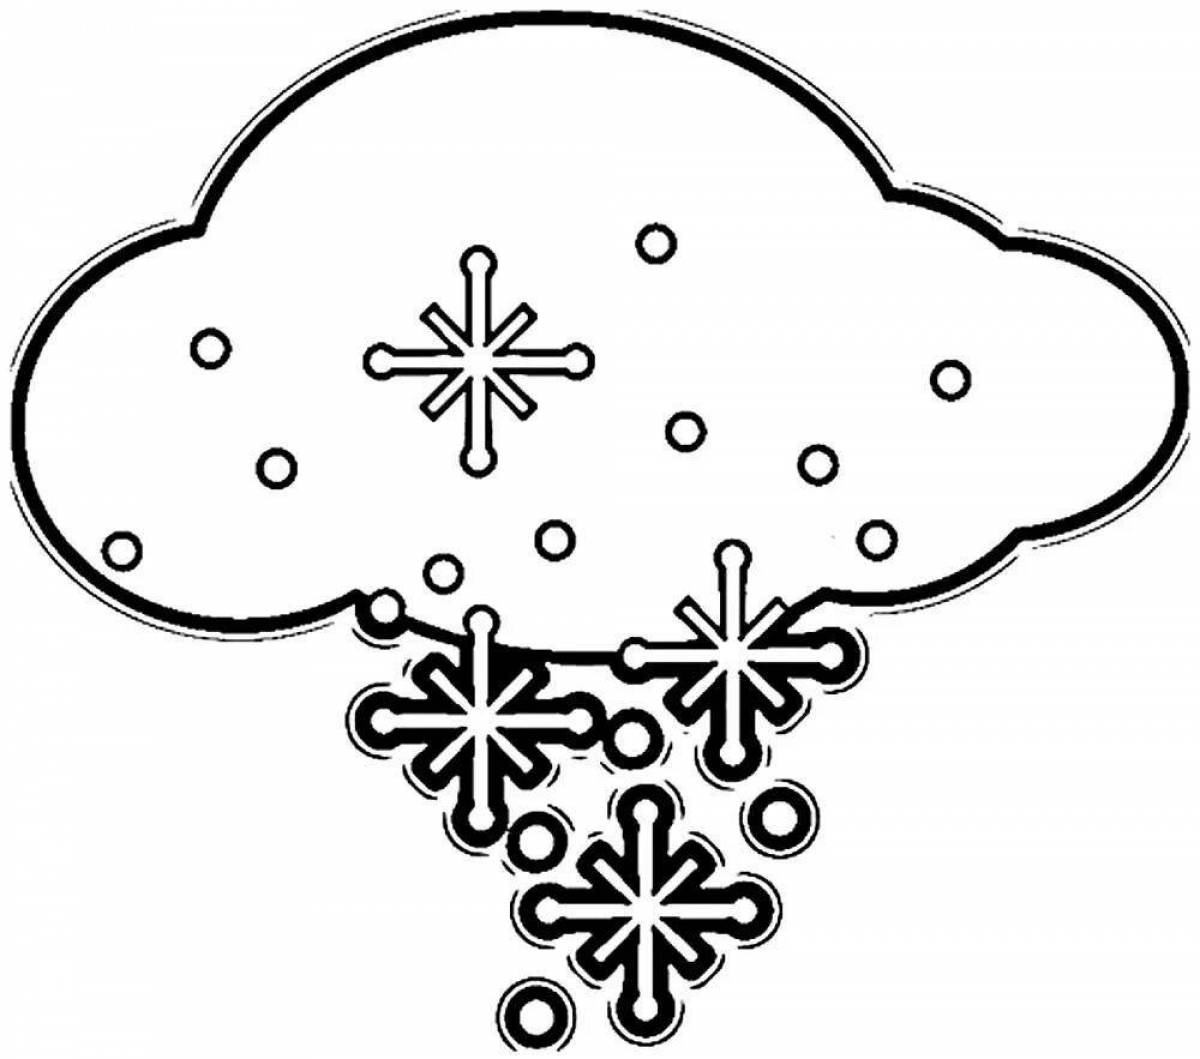 Children's Happy Snowfall Coloring Page